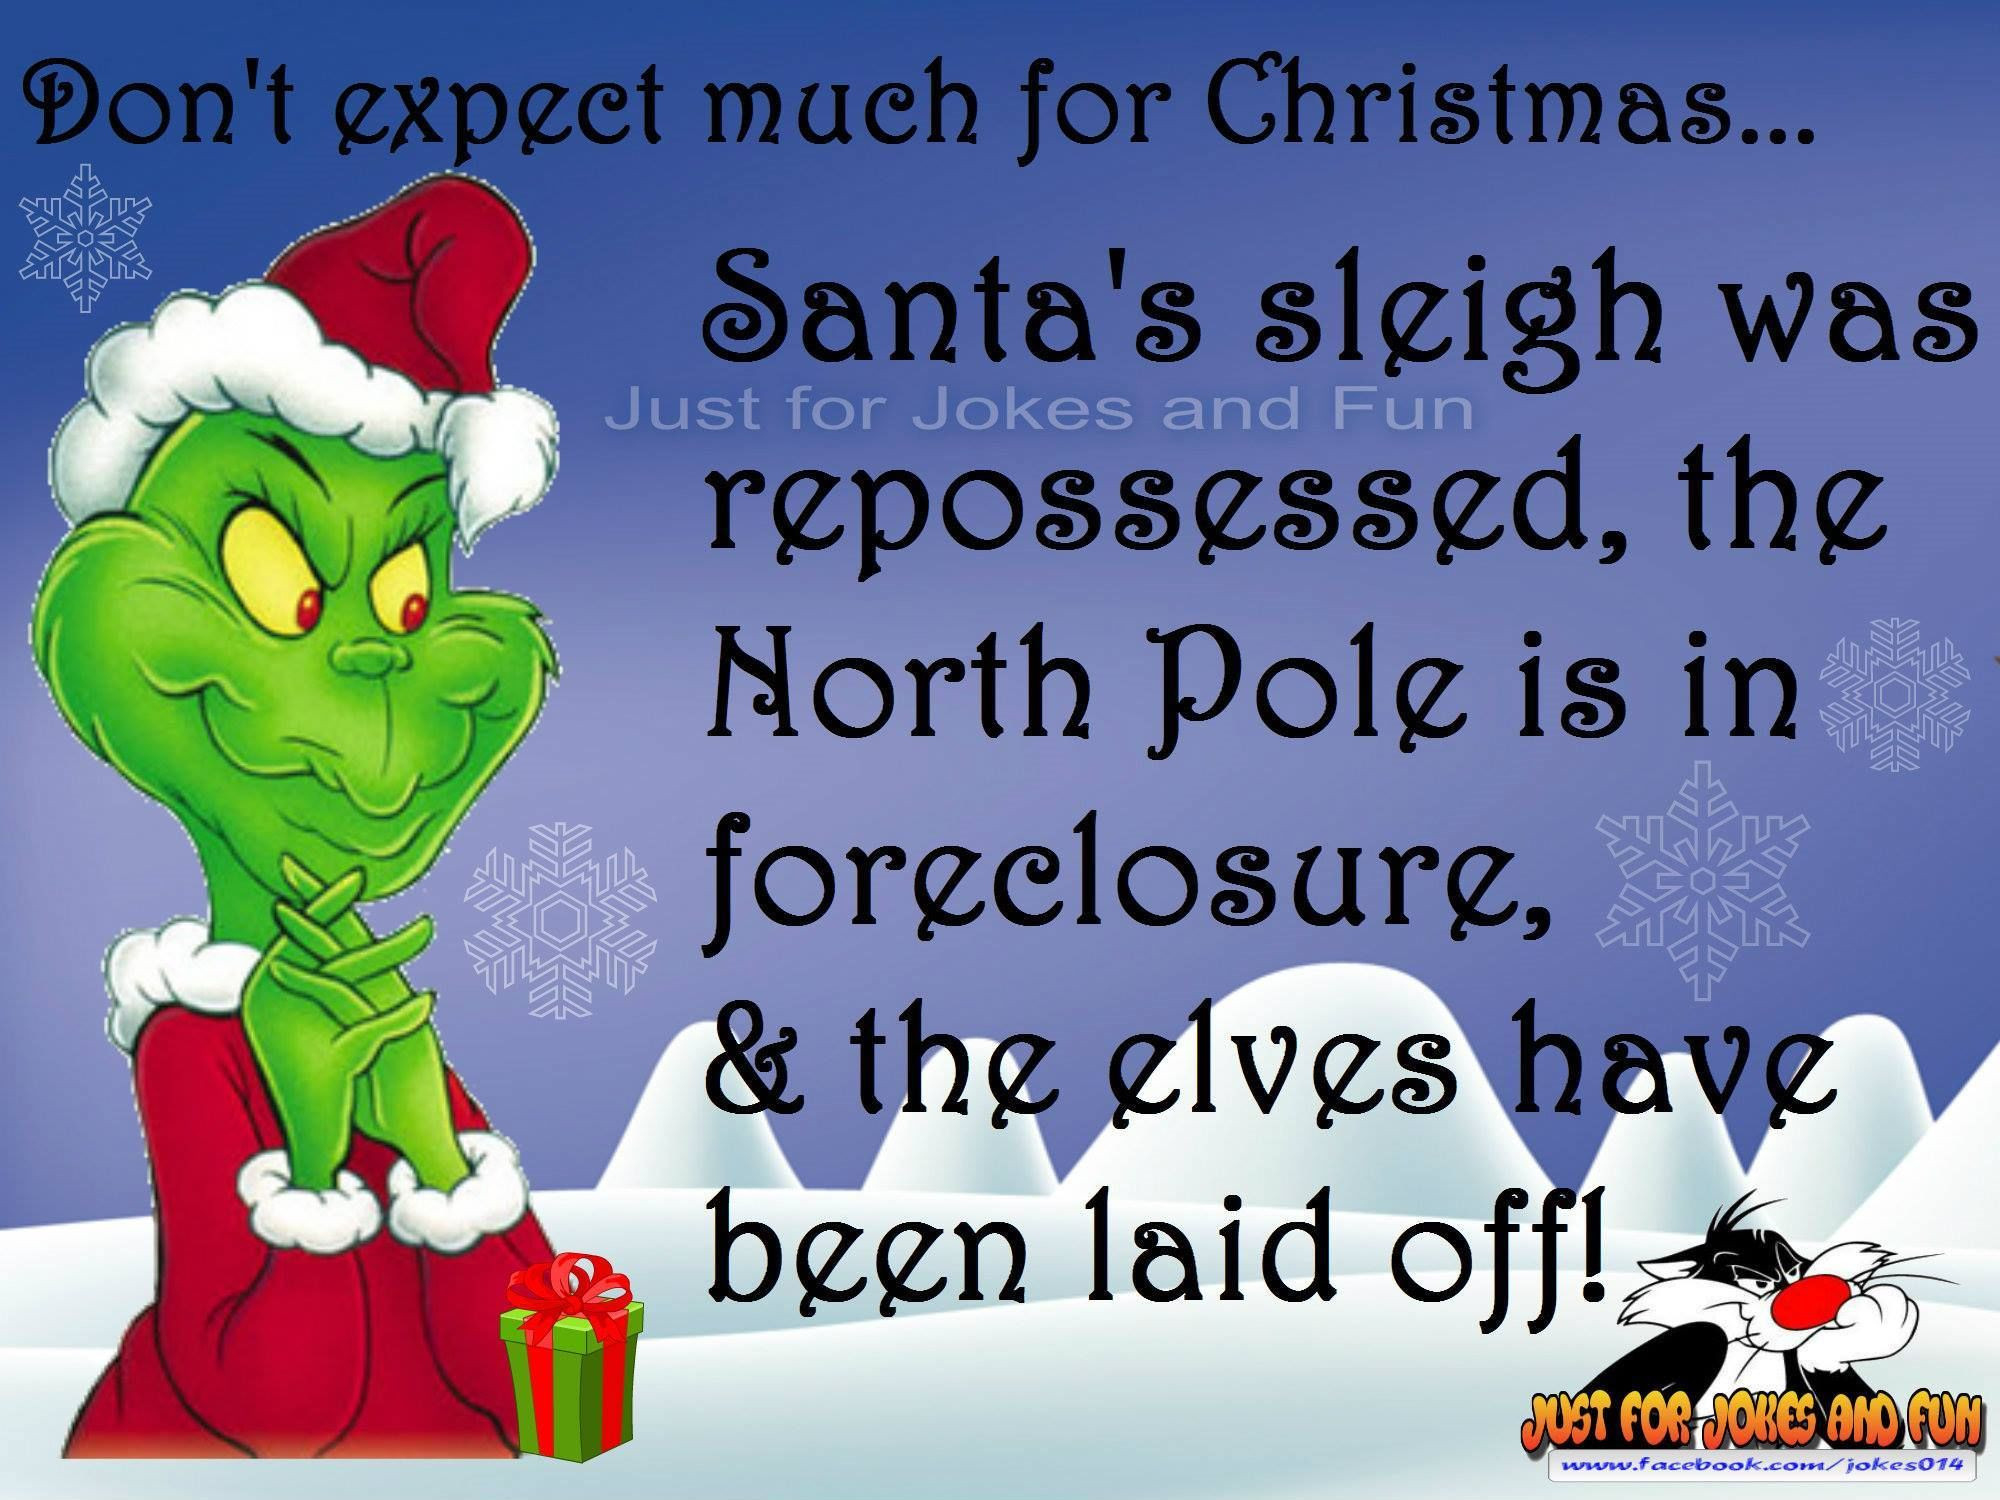 Funny Christmas Quotes Sayings
 Funny Christmas Quote With The Grinch s